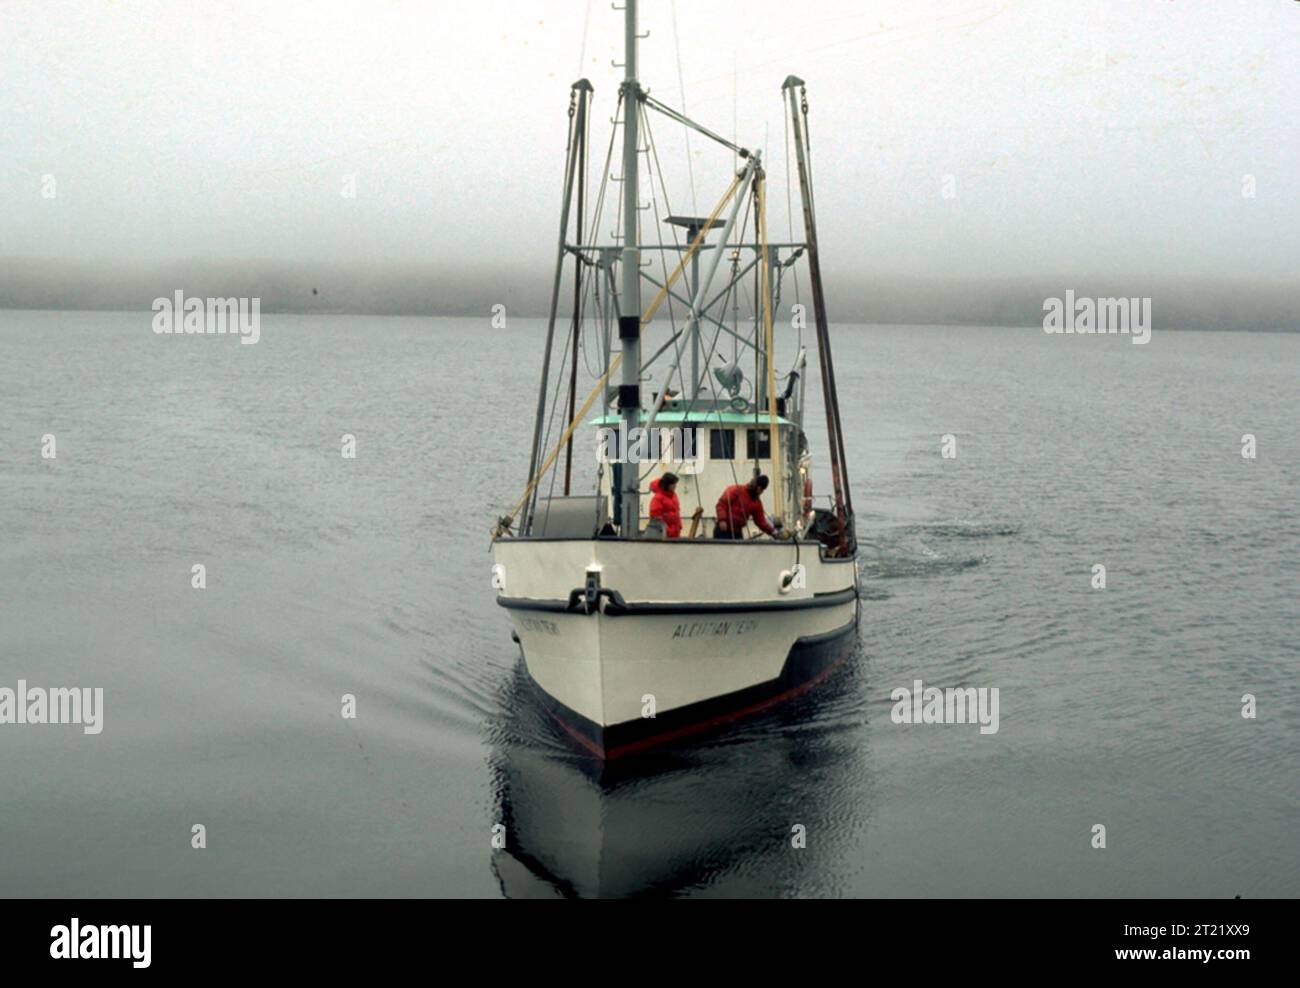 This image was taken in Constantine Harbor at the Aleutian island of Amchitka. Subjects: Transportation; Boats; Research Vessels; Alaska Maritime National Wildlife Refuge; Alaska.  . 1998 - 2011. Stock Photo